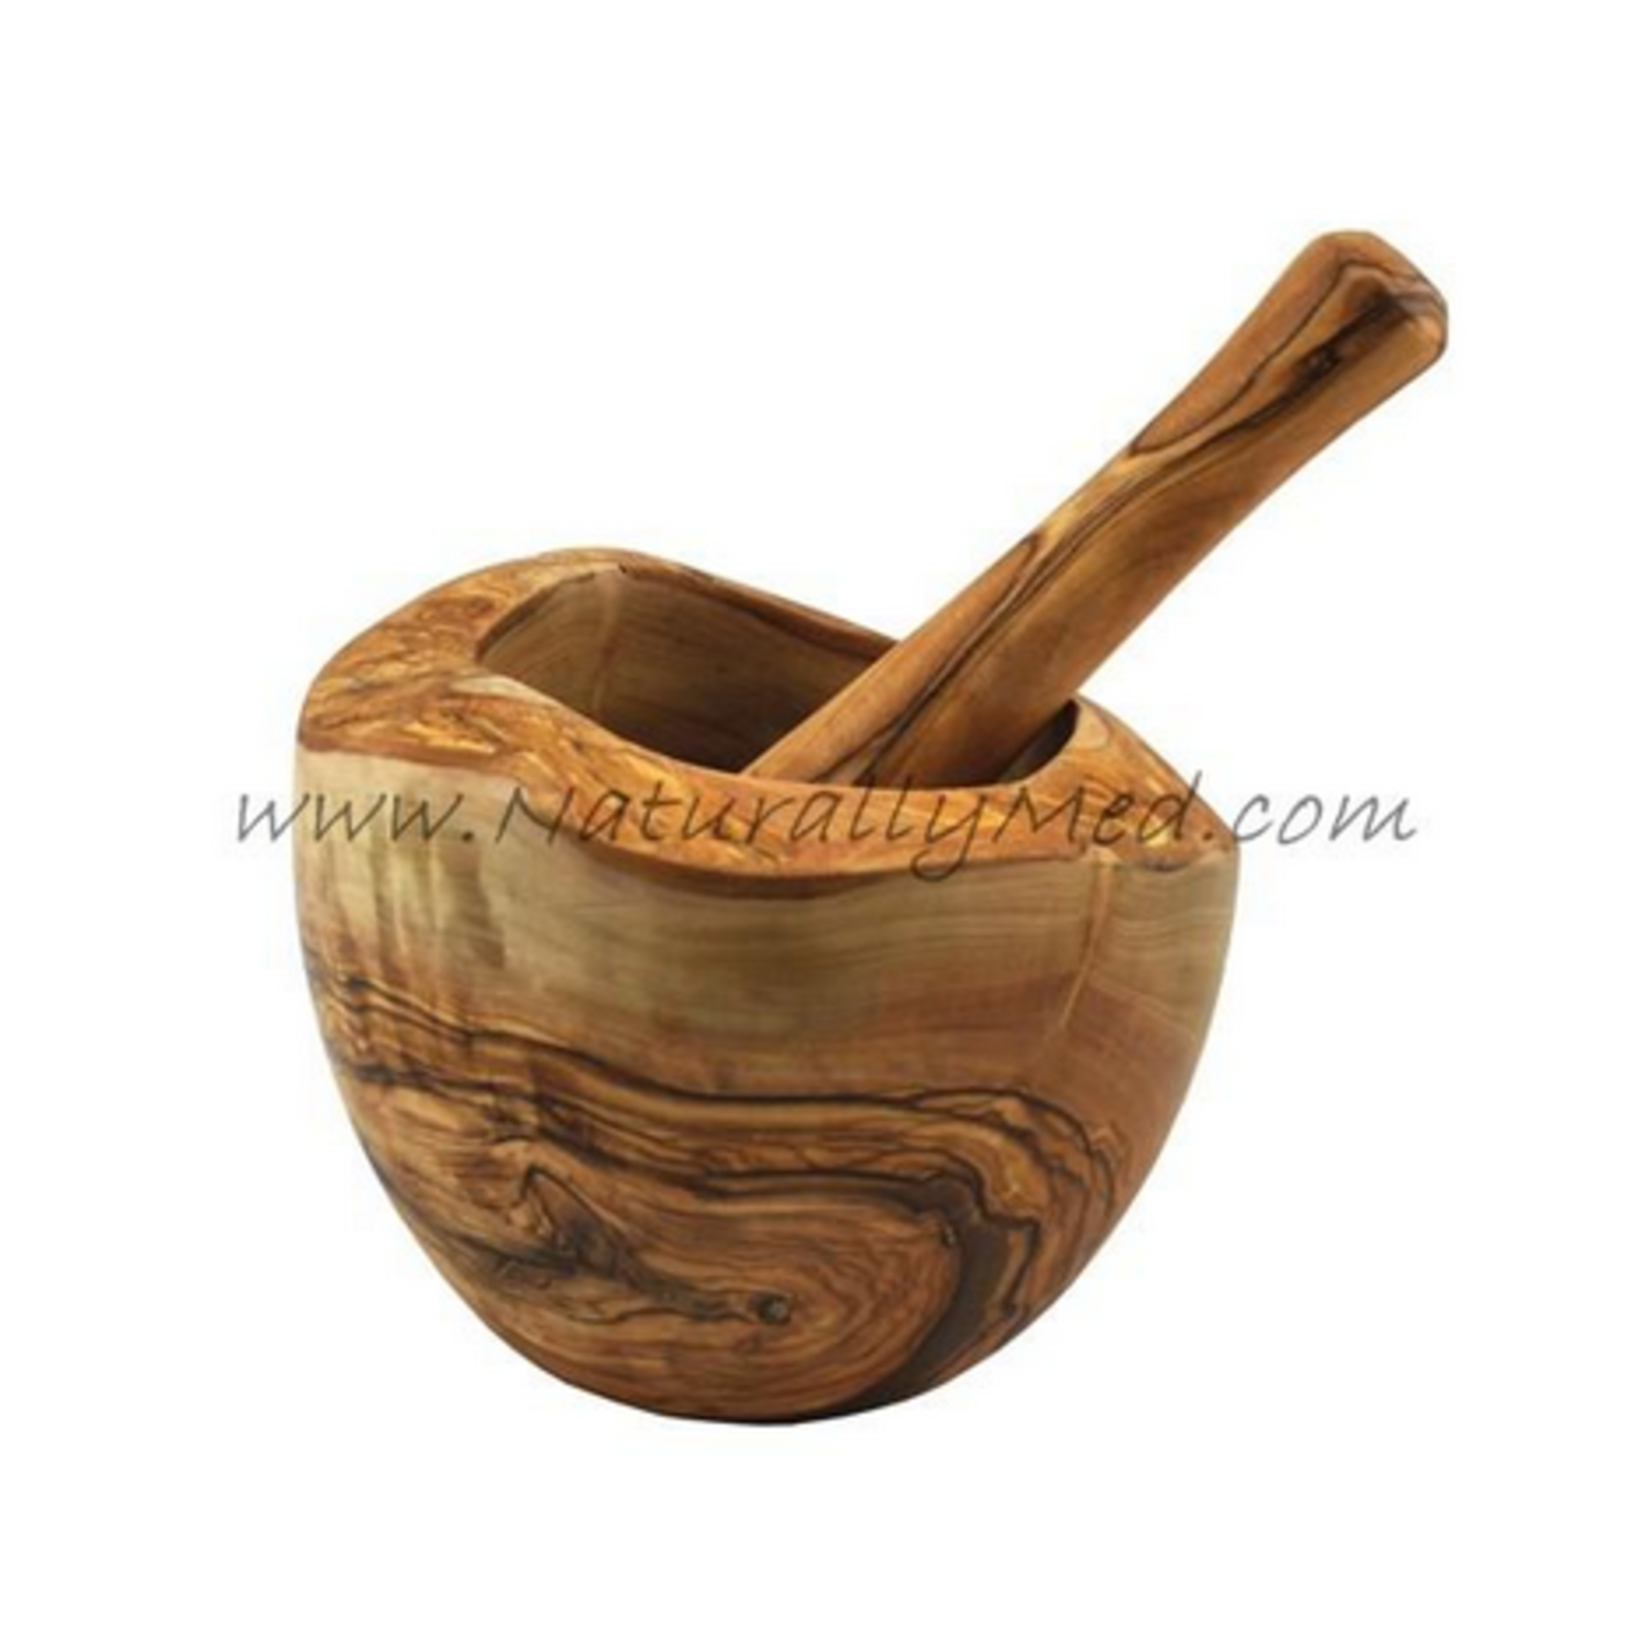 Naturally Med Olive Wood Mortar and Pestle 5.5"